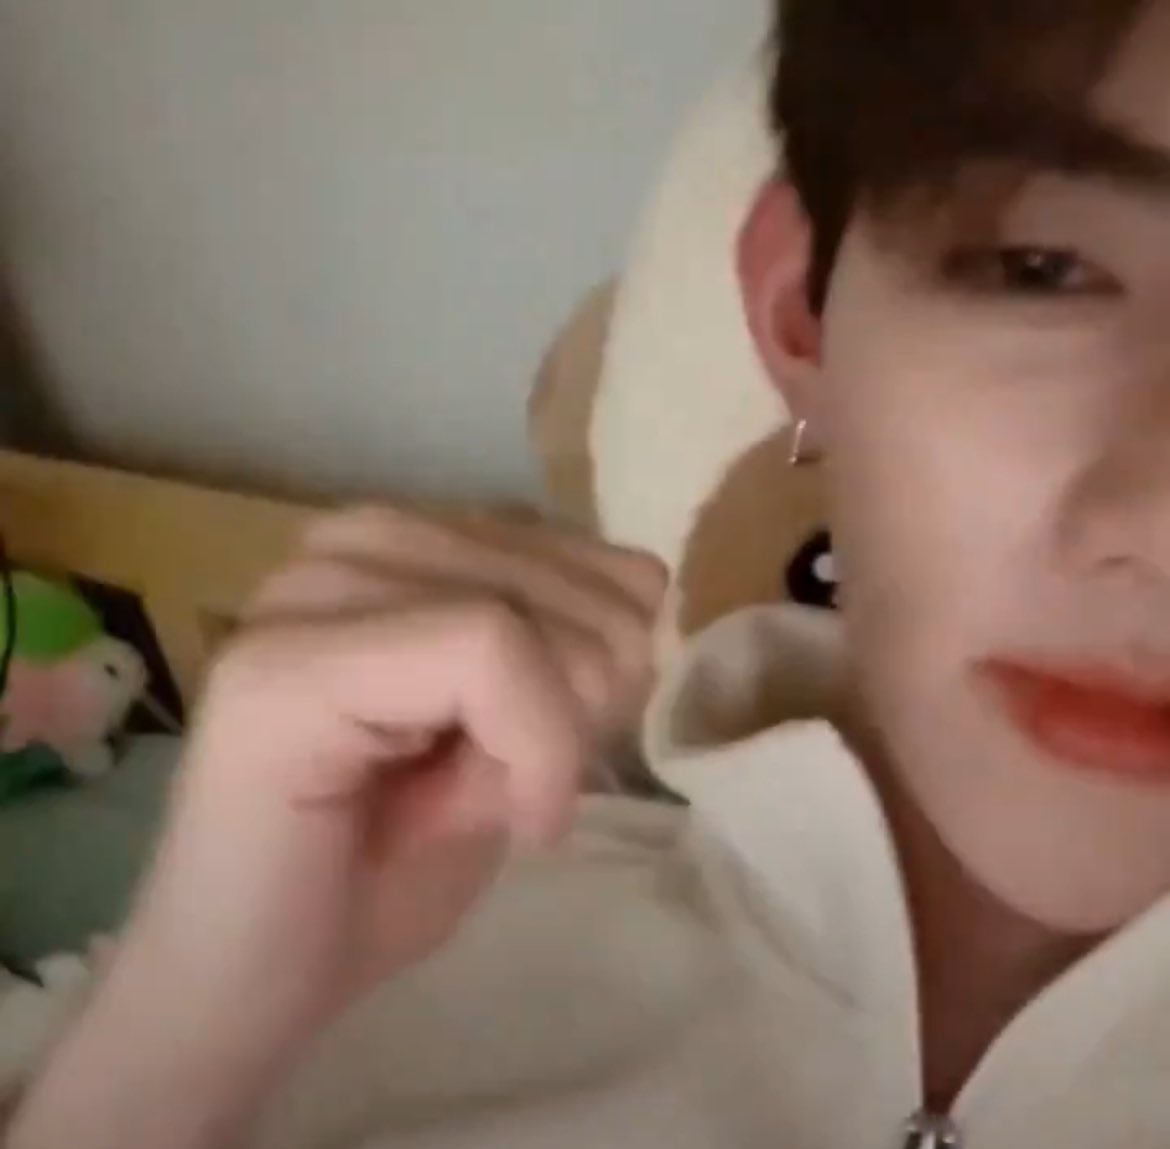 They may not often sleep together all night because they don't share the same room, but they definitely cuddle when taking quick naps or when watching shows or movies together... bin's shaymin on neul's bed is proof of it.. and let’s not forget bin’s live… yeah